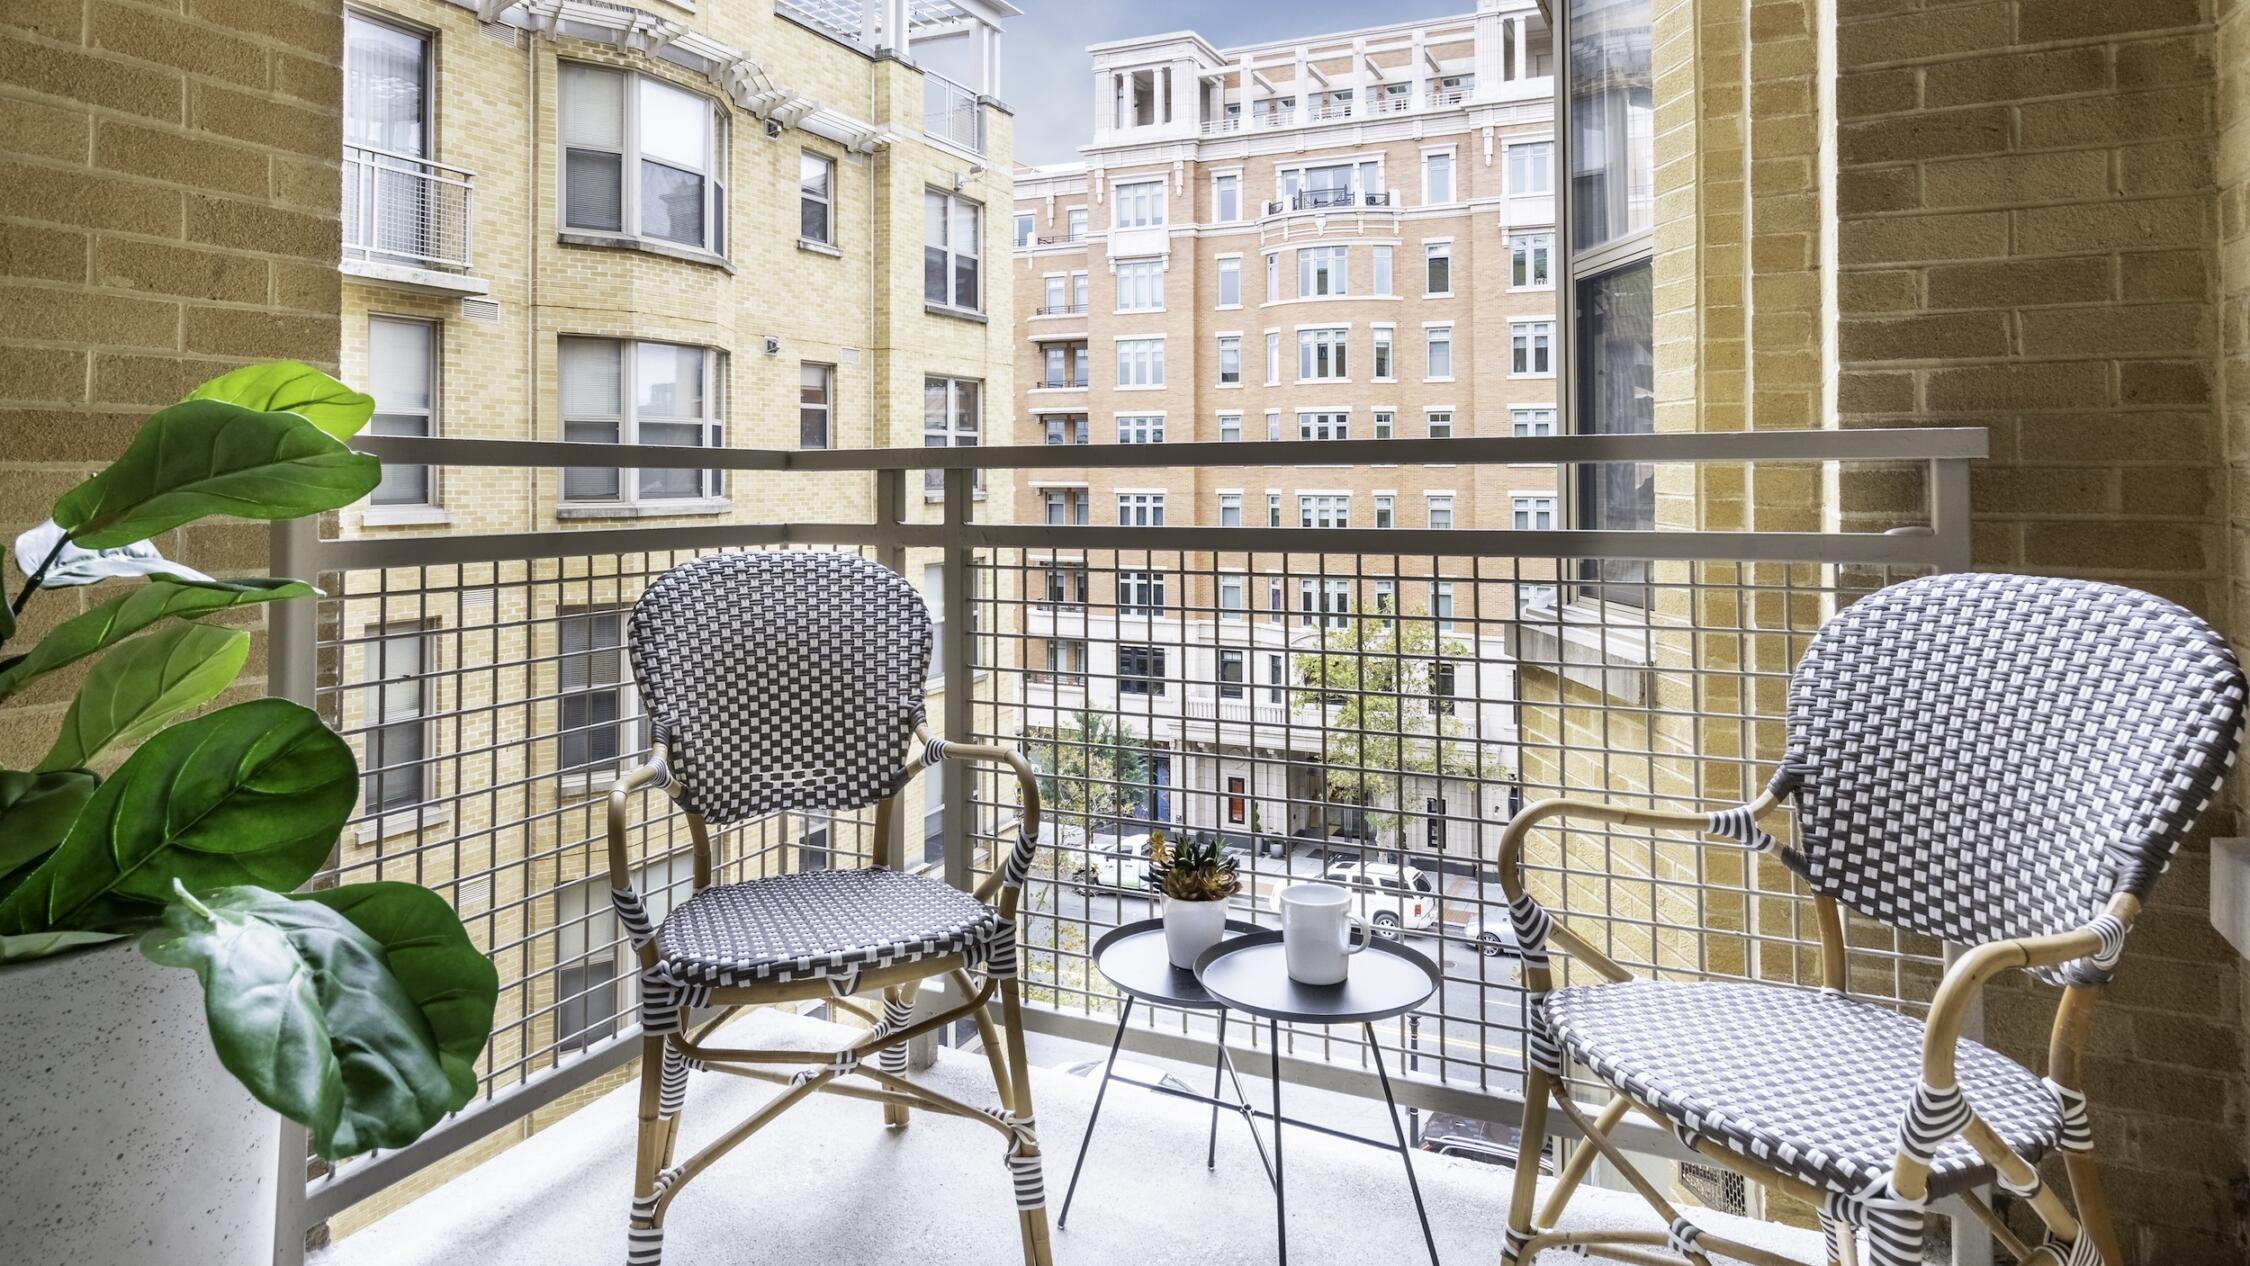 Patio of a model apartment at The Ellington with two chair and a blue sky in the distance